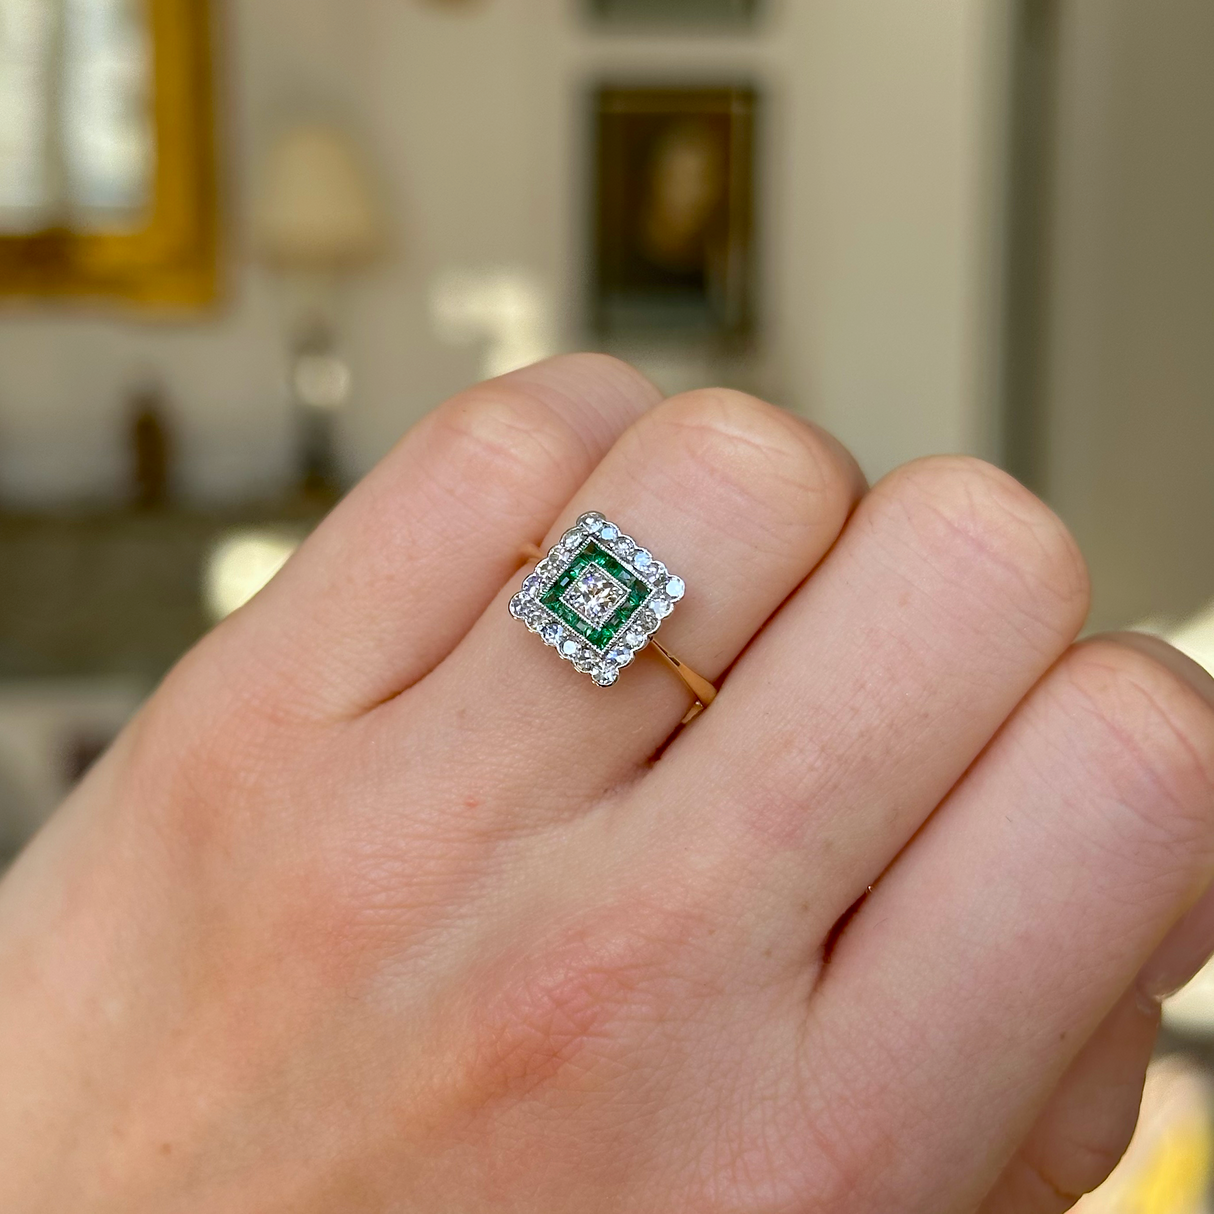 Antique, Emerald and Diamond Square Cluster Ring, 18ct Yellow Gold and Platinum worn on closed hand. 